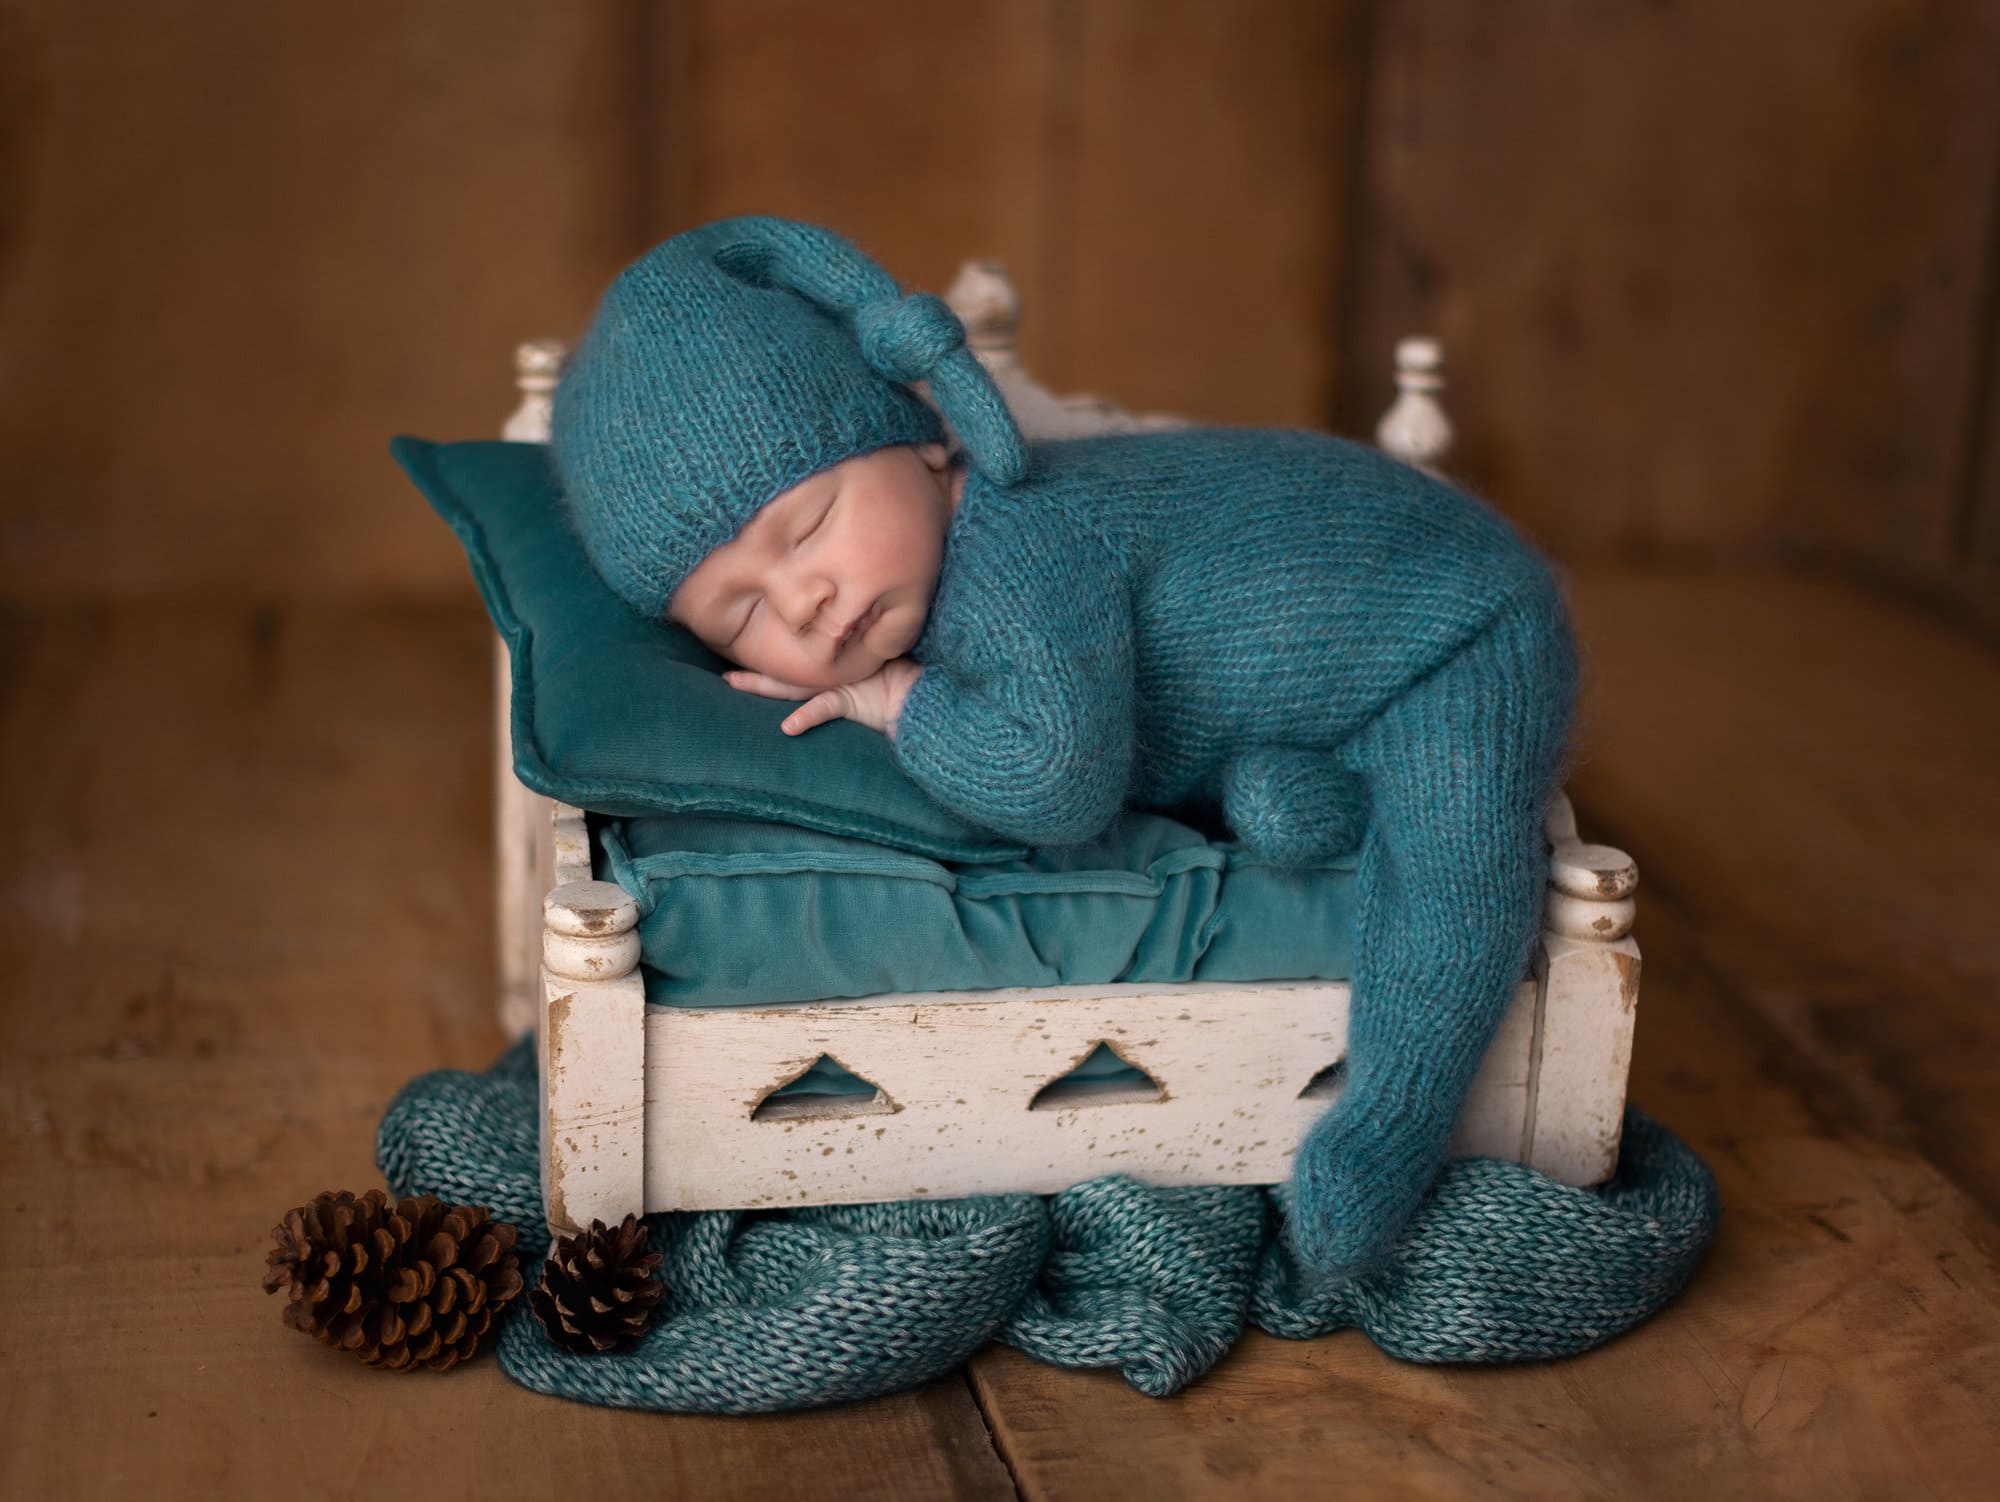 Newborn baby boy in a teal wool romper and hat sleeps on a Newborn bed on a brown wooden floor during his first photoshoot with Alison McKenny, Cambridge Photographer